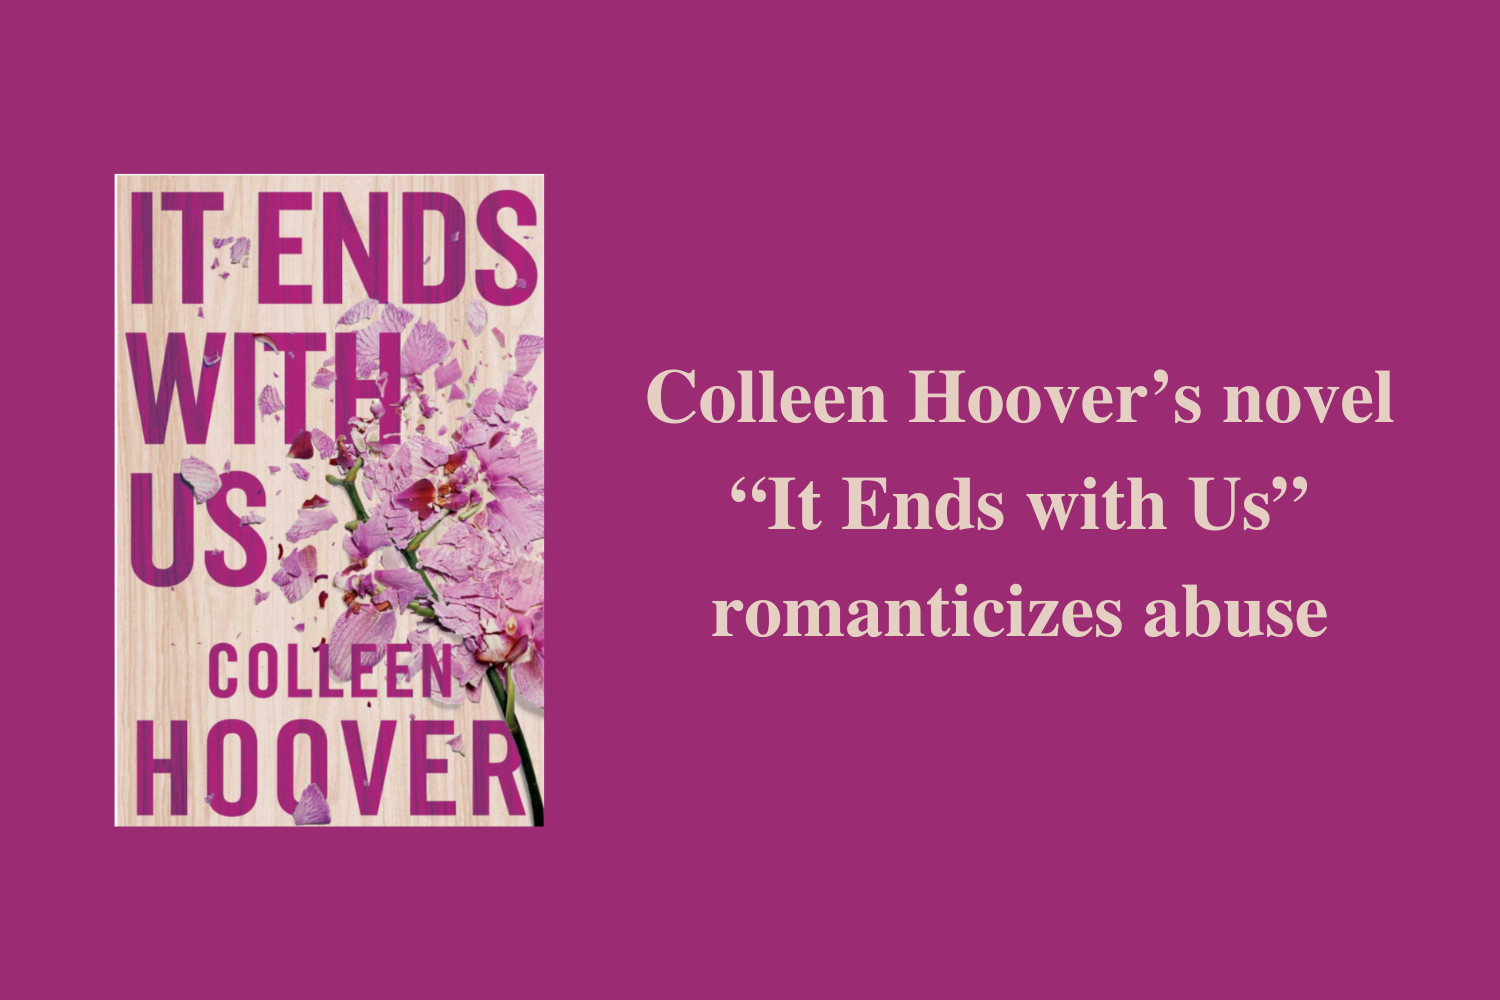 Colleen Hoover's novel “It Ends with Us” romanticizes abuse – The Standard